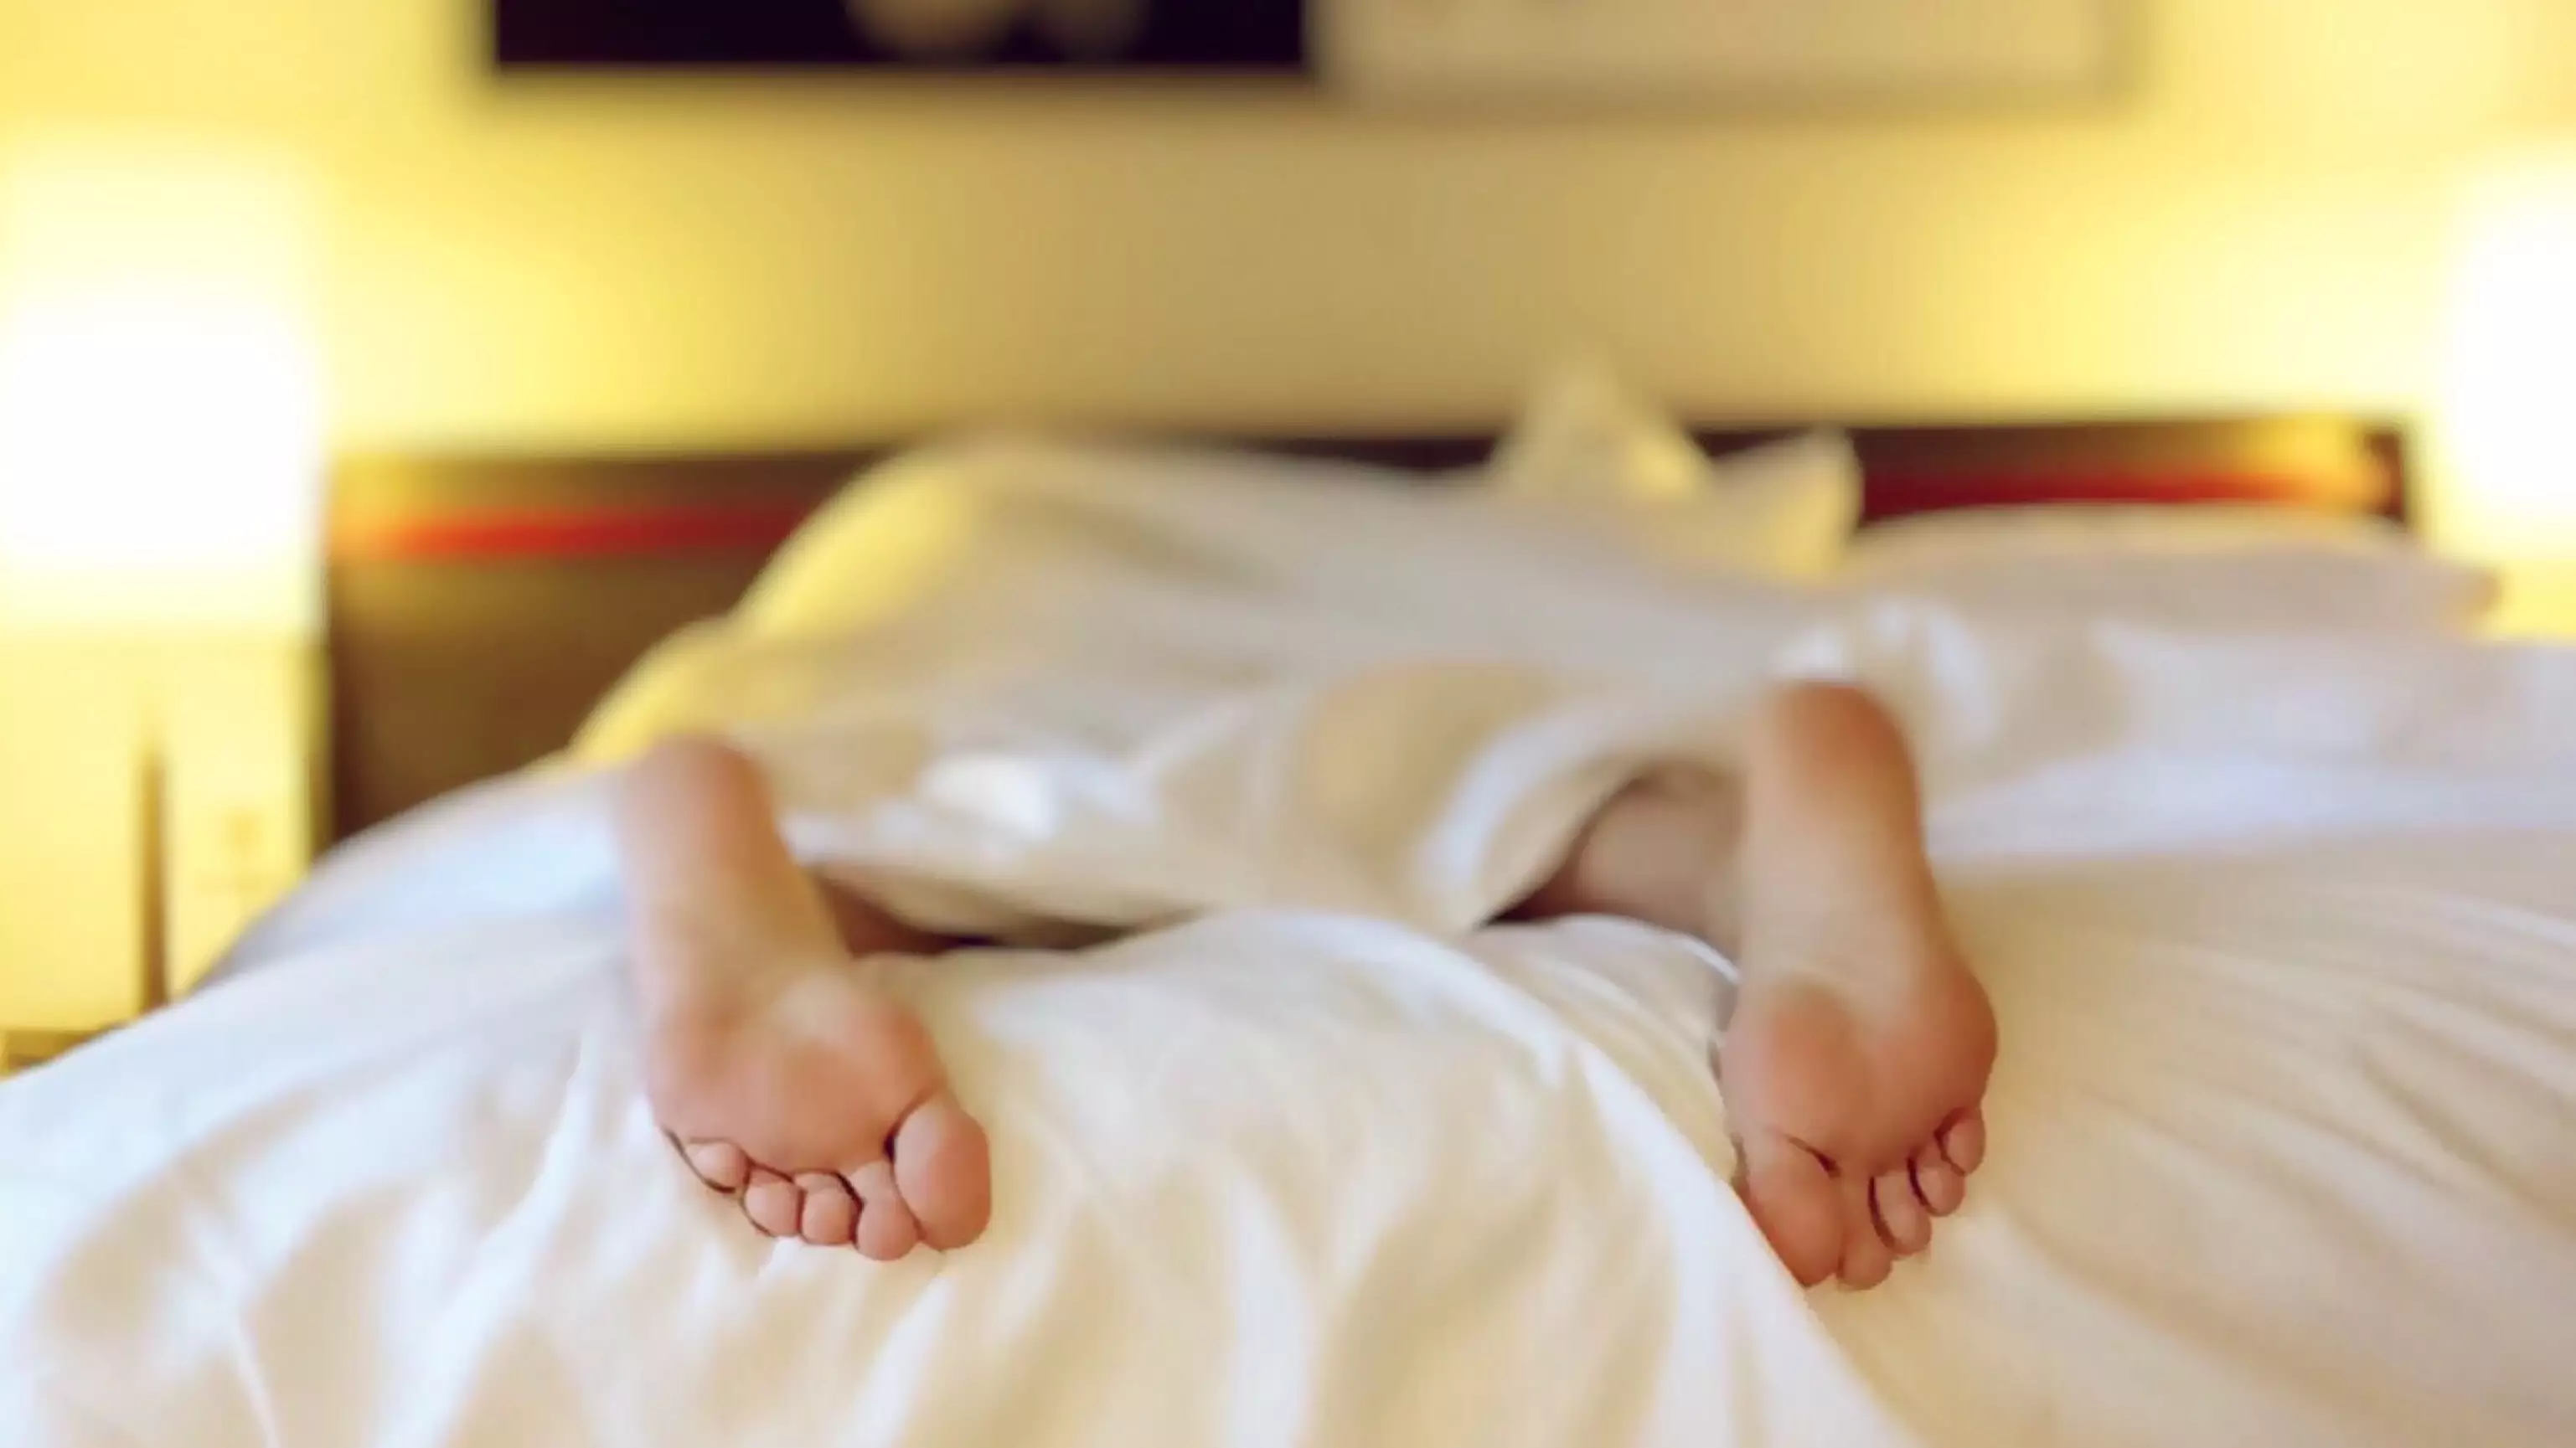 NHS Doctor Explains Why You Should Wear Socks When You Sleep